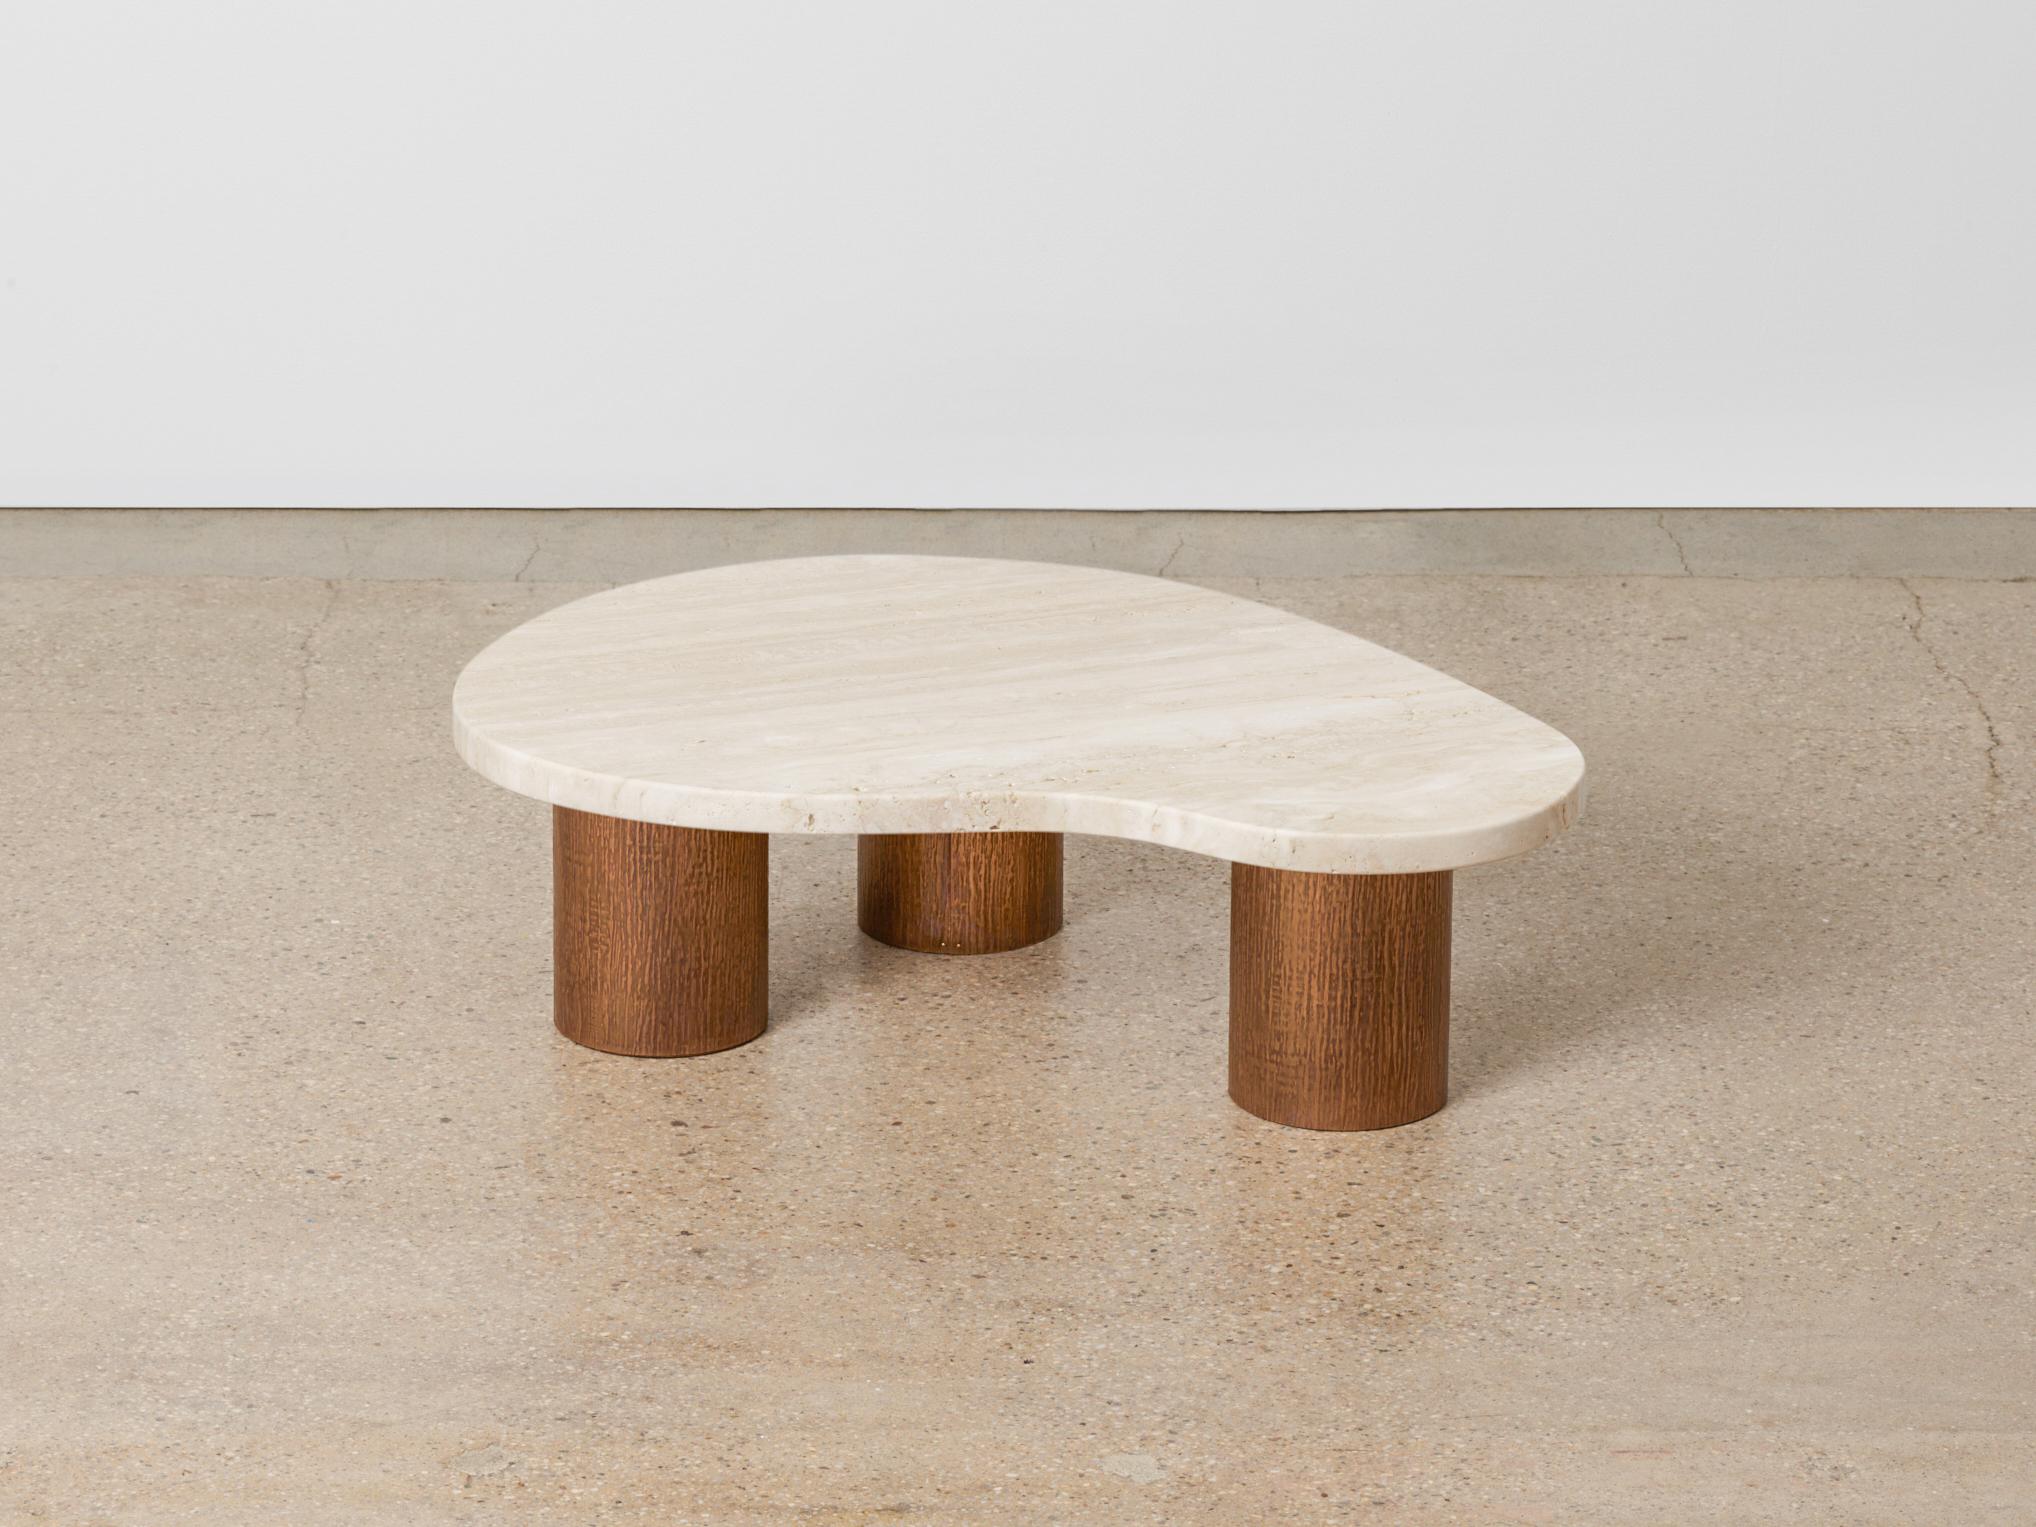 Small Andrea Nesting table by Umberto Bellardi Ricci.
Dimensions: D 74 x W 56 x H 18 cm.
Materials: Travertine, bronze legs.

Umberto Bellardi Ricci is an Italian sculptor and architect based in New York City, practicing across London, Mexico,